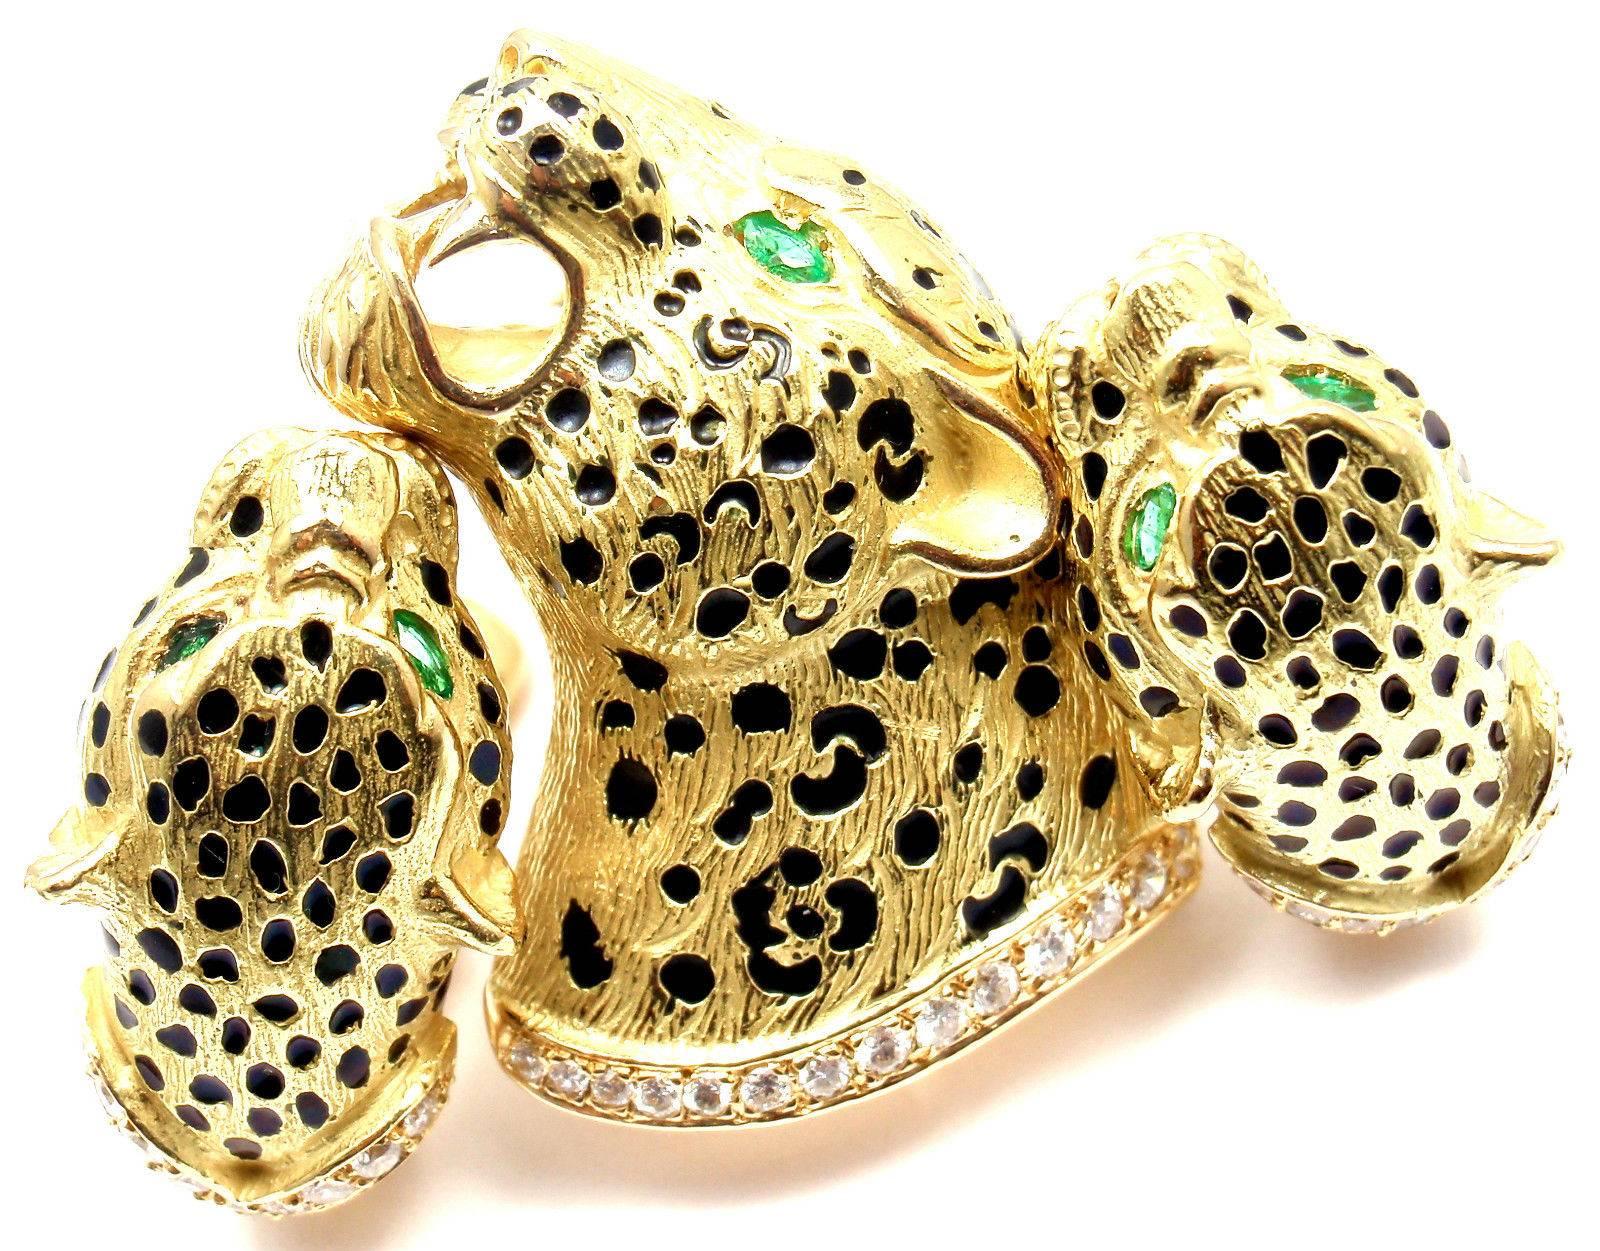 18k Yellow Gold Diamond & Emerald Leopard Brooch and Earrings Set 
by Gay Freres .
With 34 round brilliant cut diamonds SI1 clarity, G color 
total weight approx. .84ct
3 emeralds

Details:
Brooch: 34mm x 23mm x 14mm
Earrings: 25mm x 14mm x